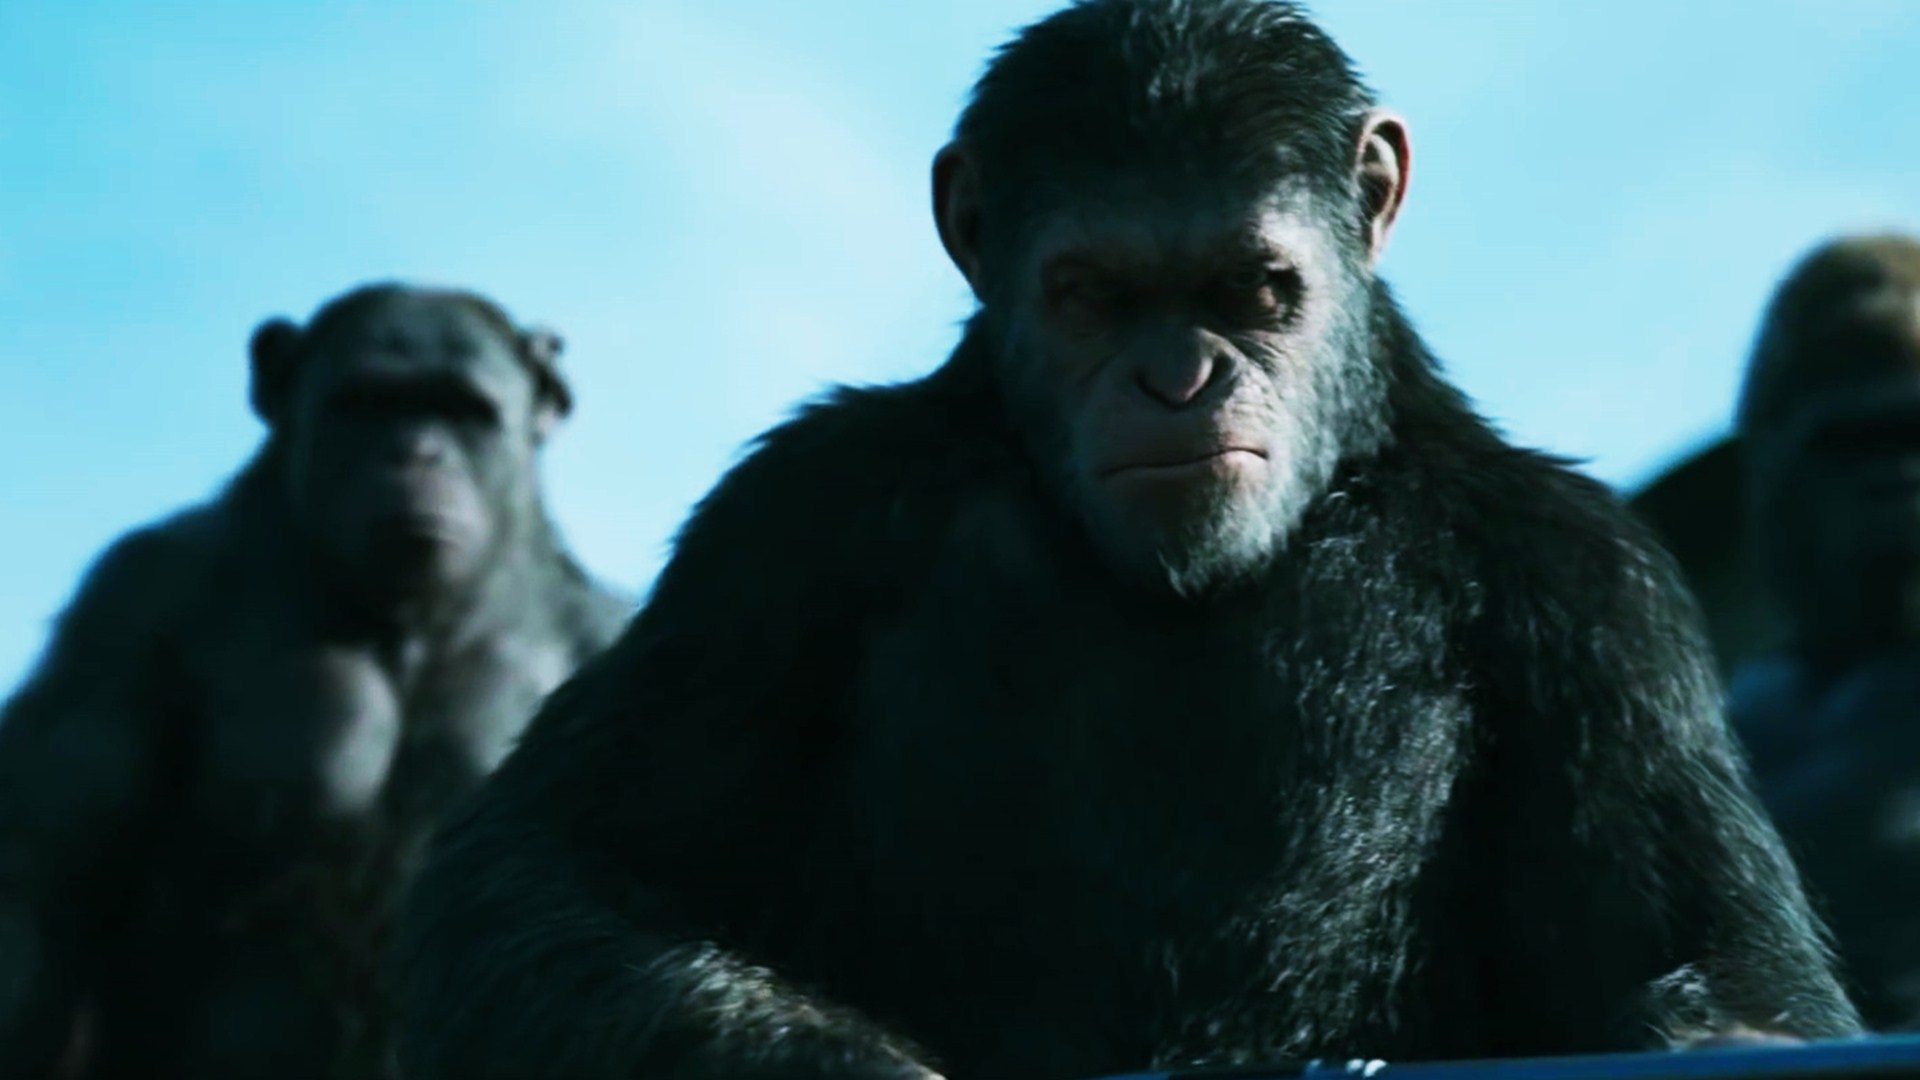 Download Original Resolution - Planet Of The Apes , HD Wallpaper & Backgrounds